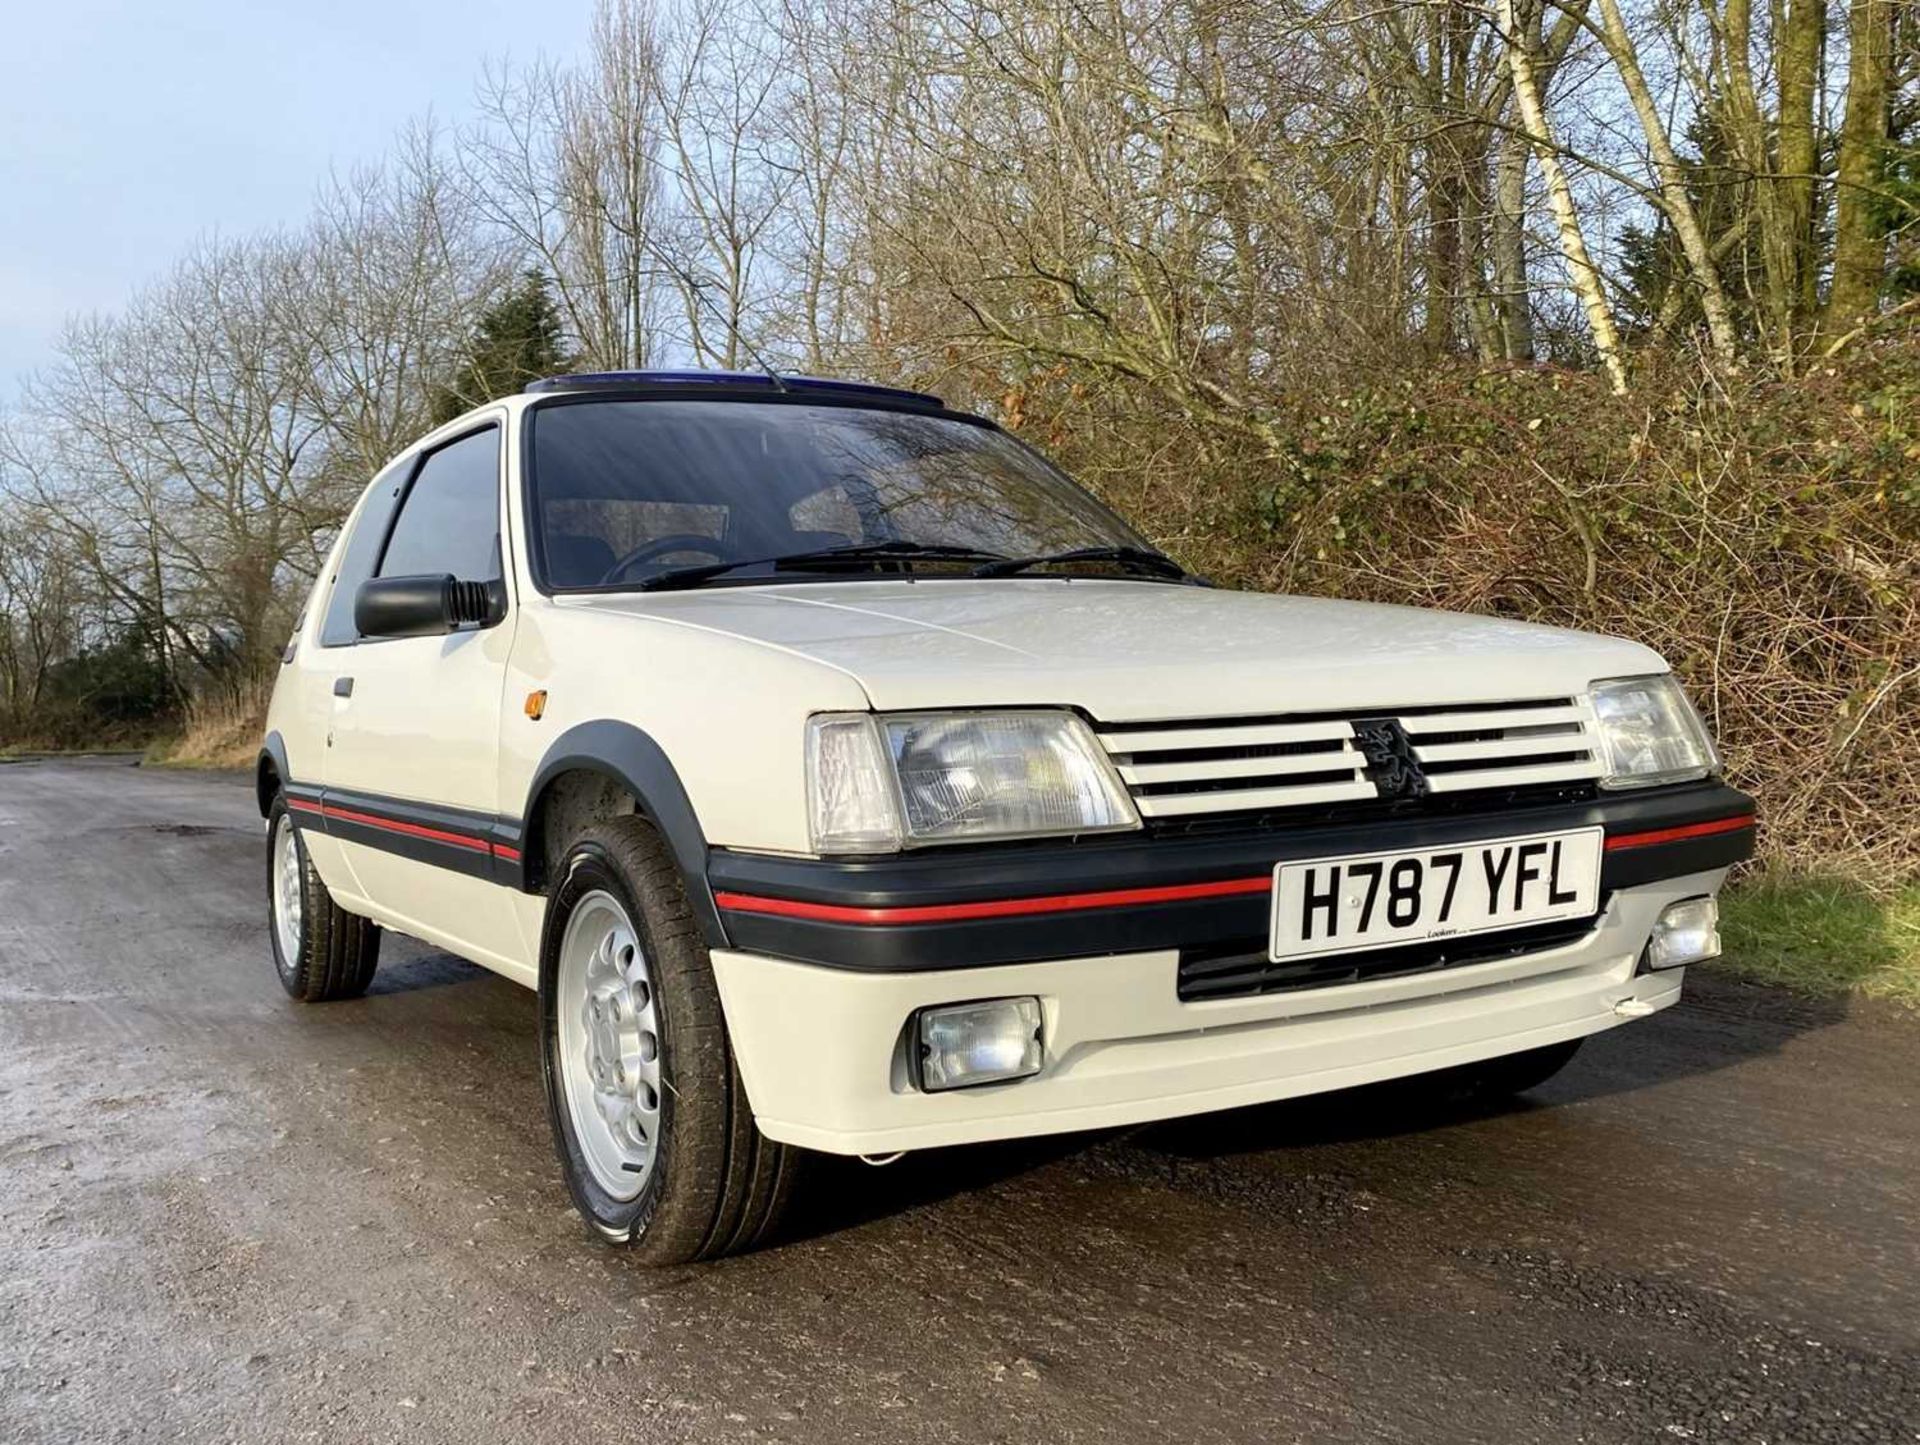 1990 Peugeot 205 GTi 1.6 Only 56,000 miles, same owner for 16 years - Image 5 of 81